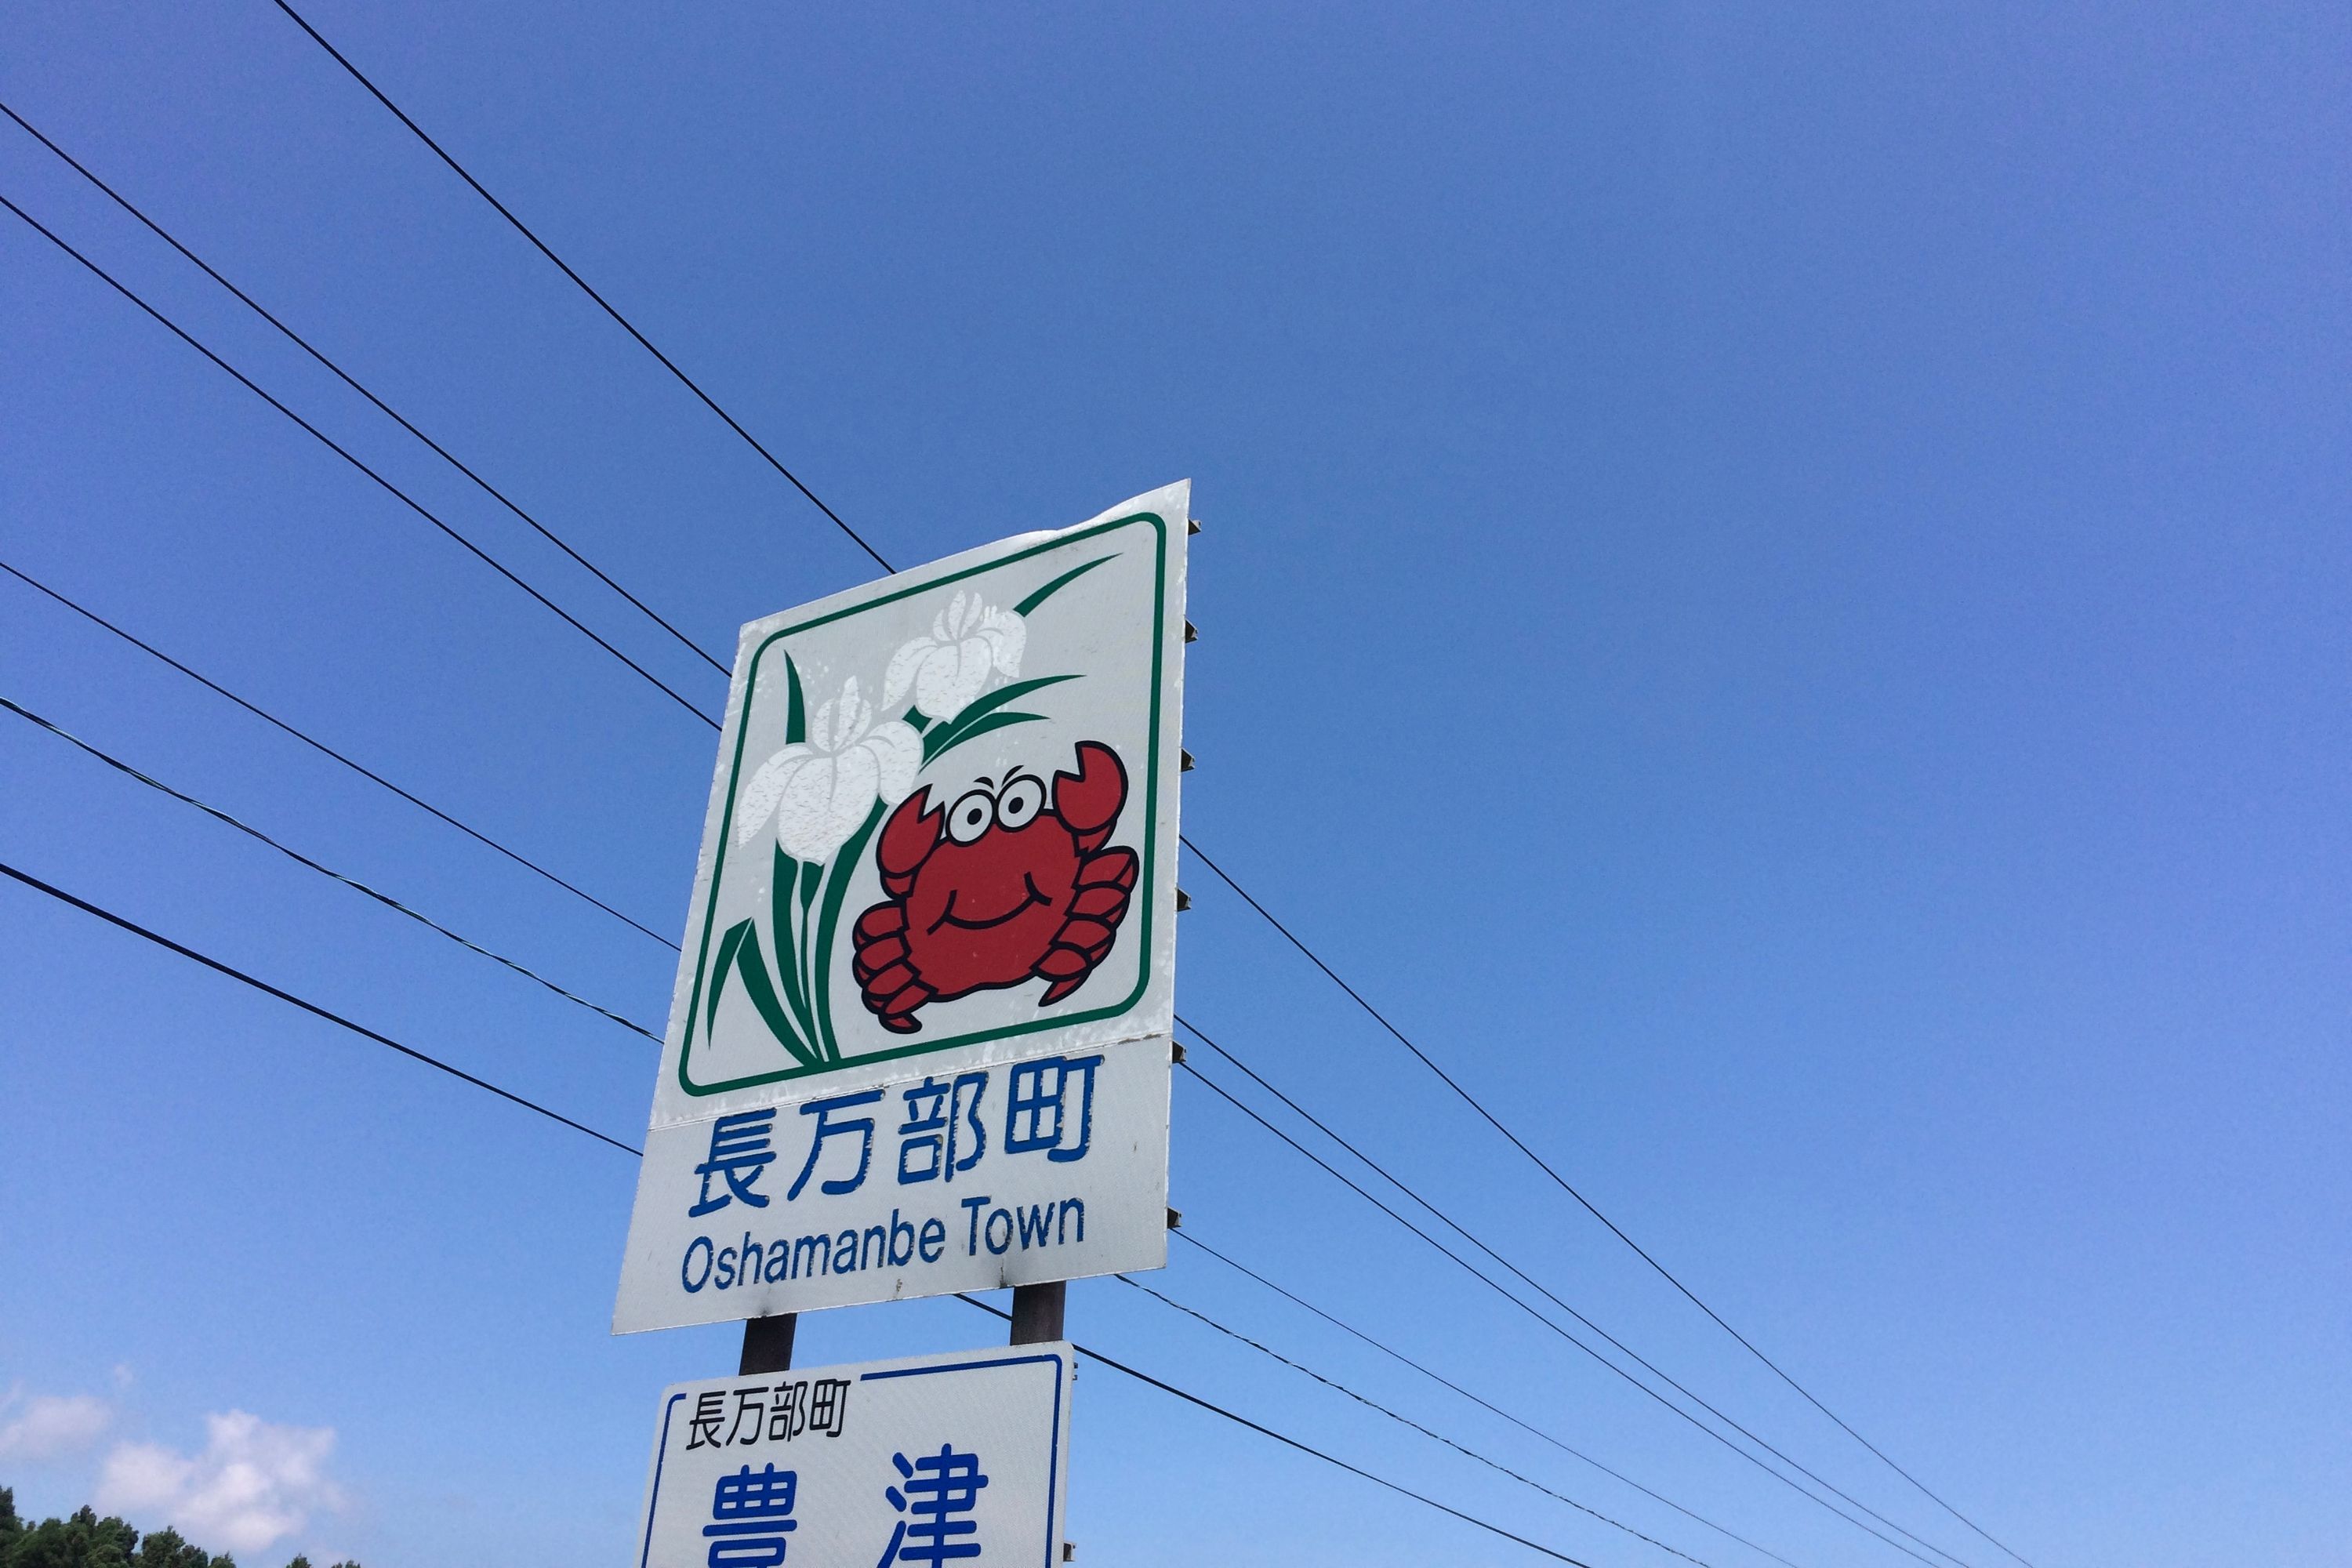 The same crab, the emblem of Oshamanbe Town, on a sign.